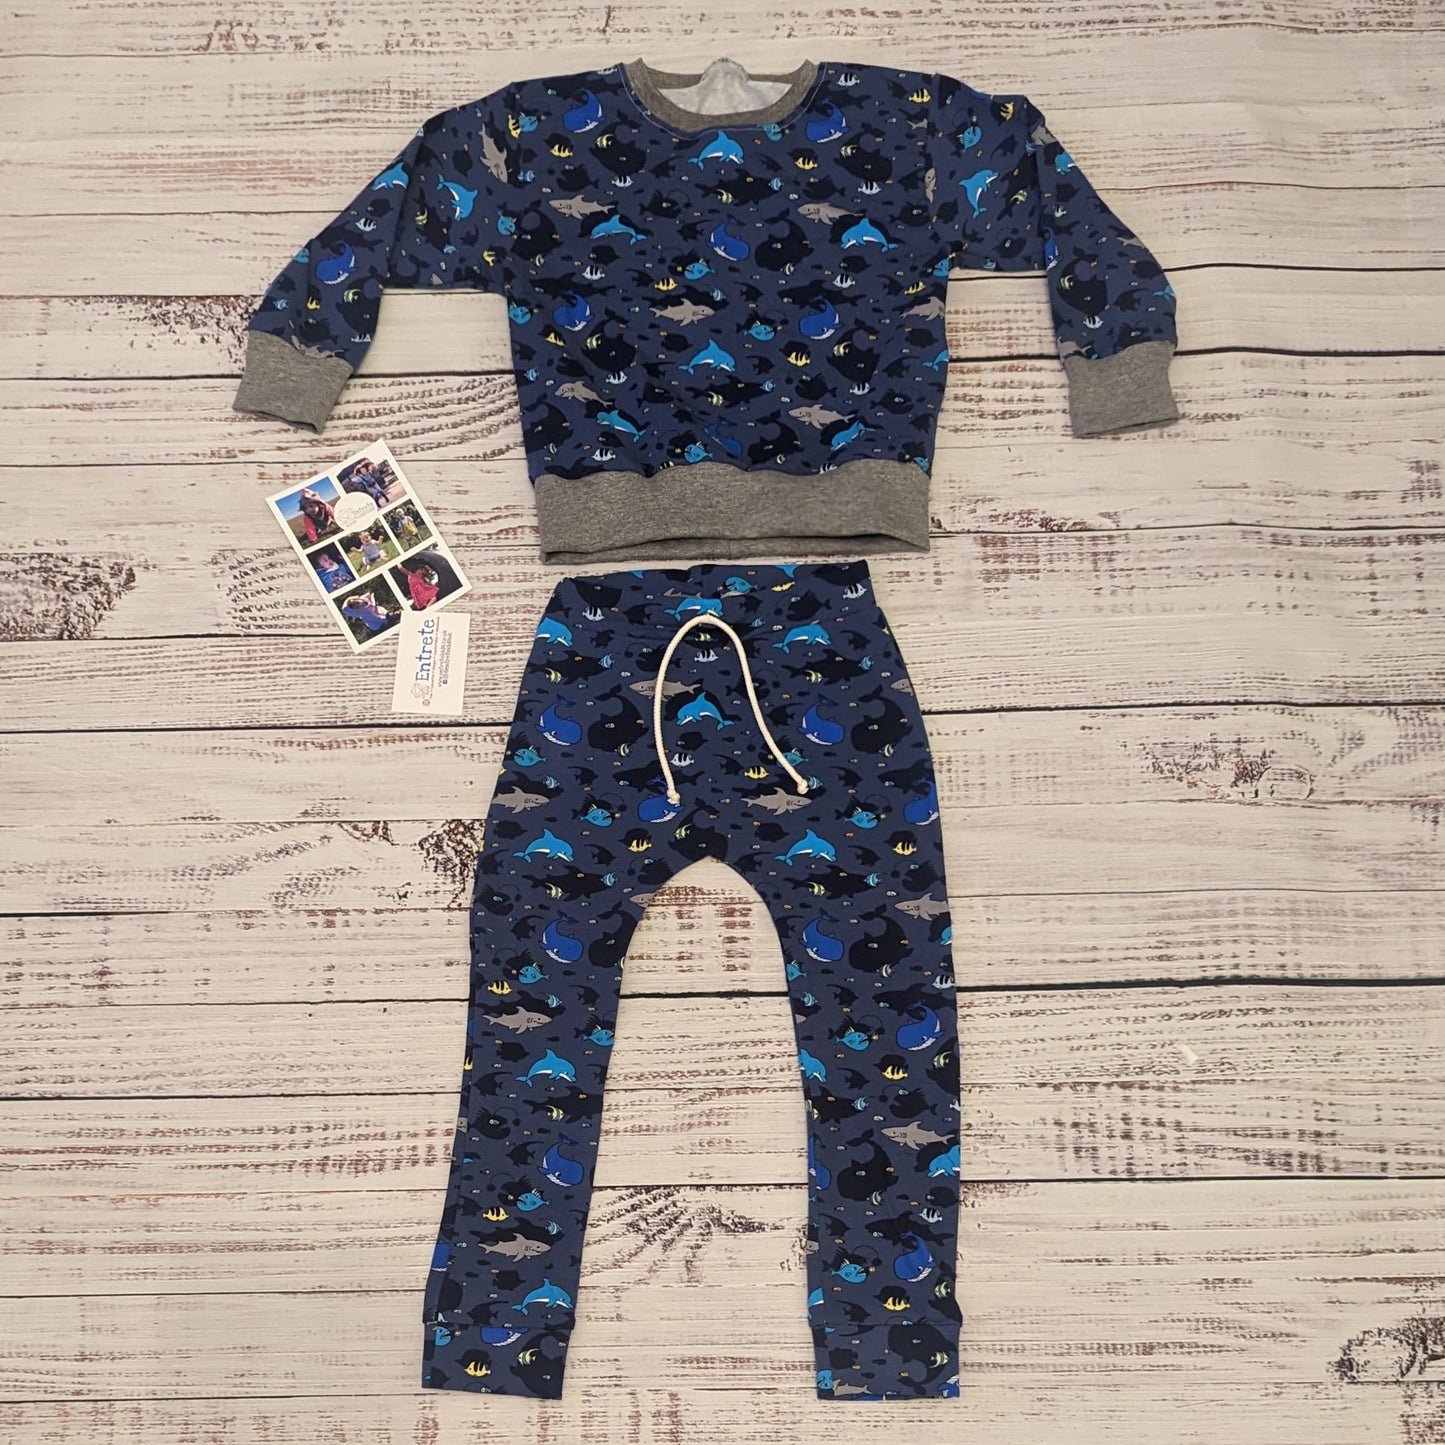 Kids navy sea creatures harem joggers. Handmade using navy sea life shadows cotton jersey. Shown as an outfit with matching sweatshirt.